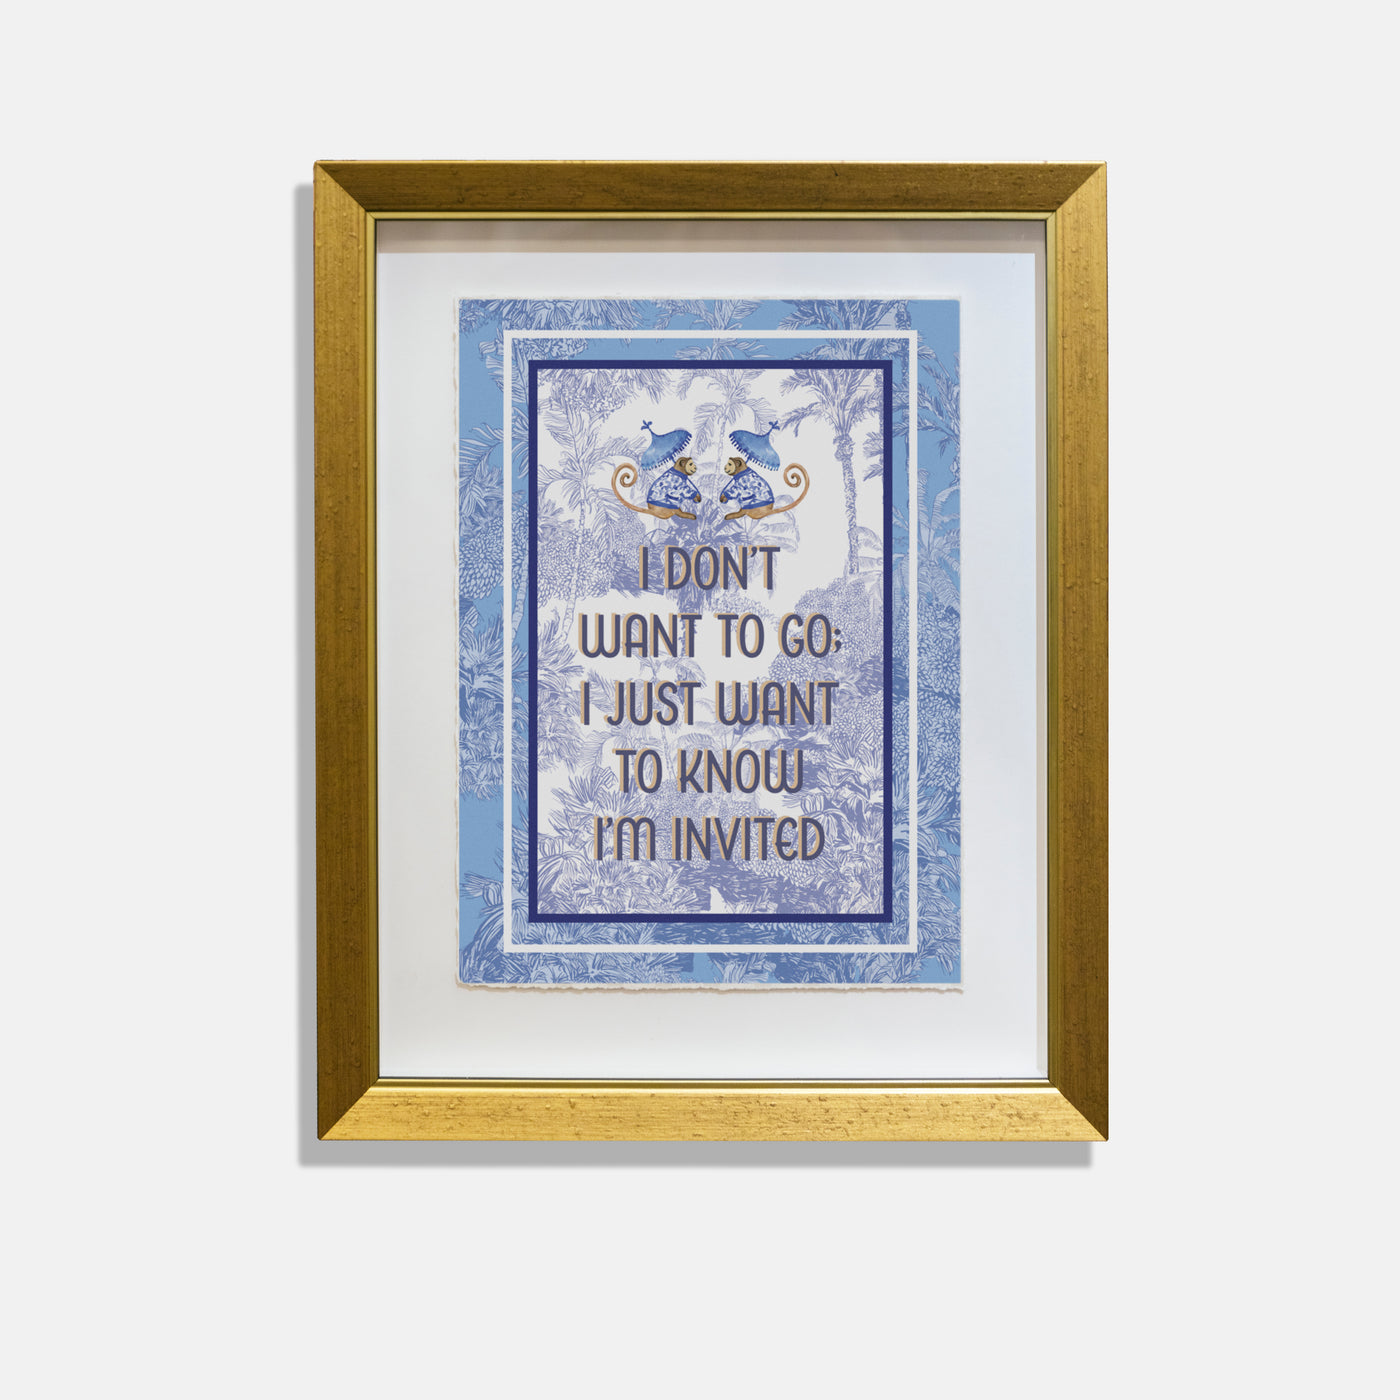 blue botanical print with monkeys and text "I dont know to go I just want to know im invited" in a gold frame